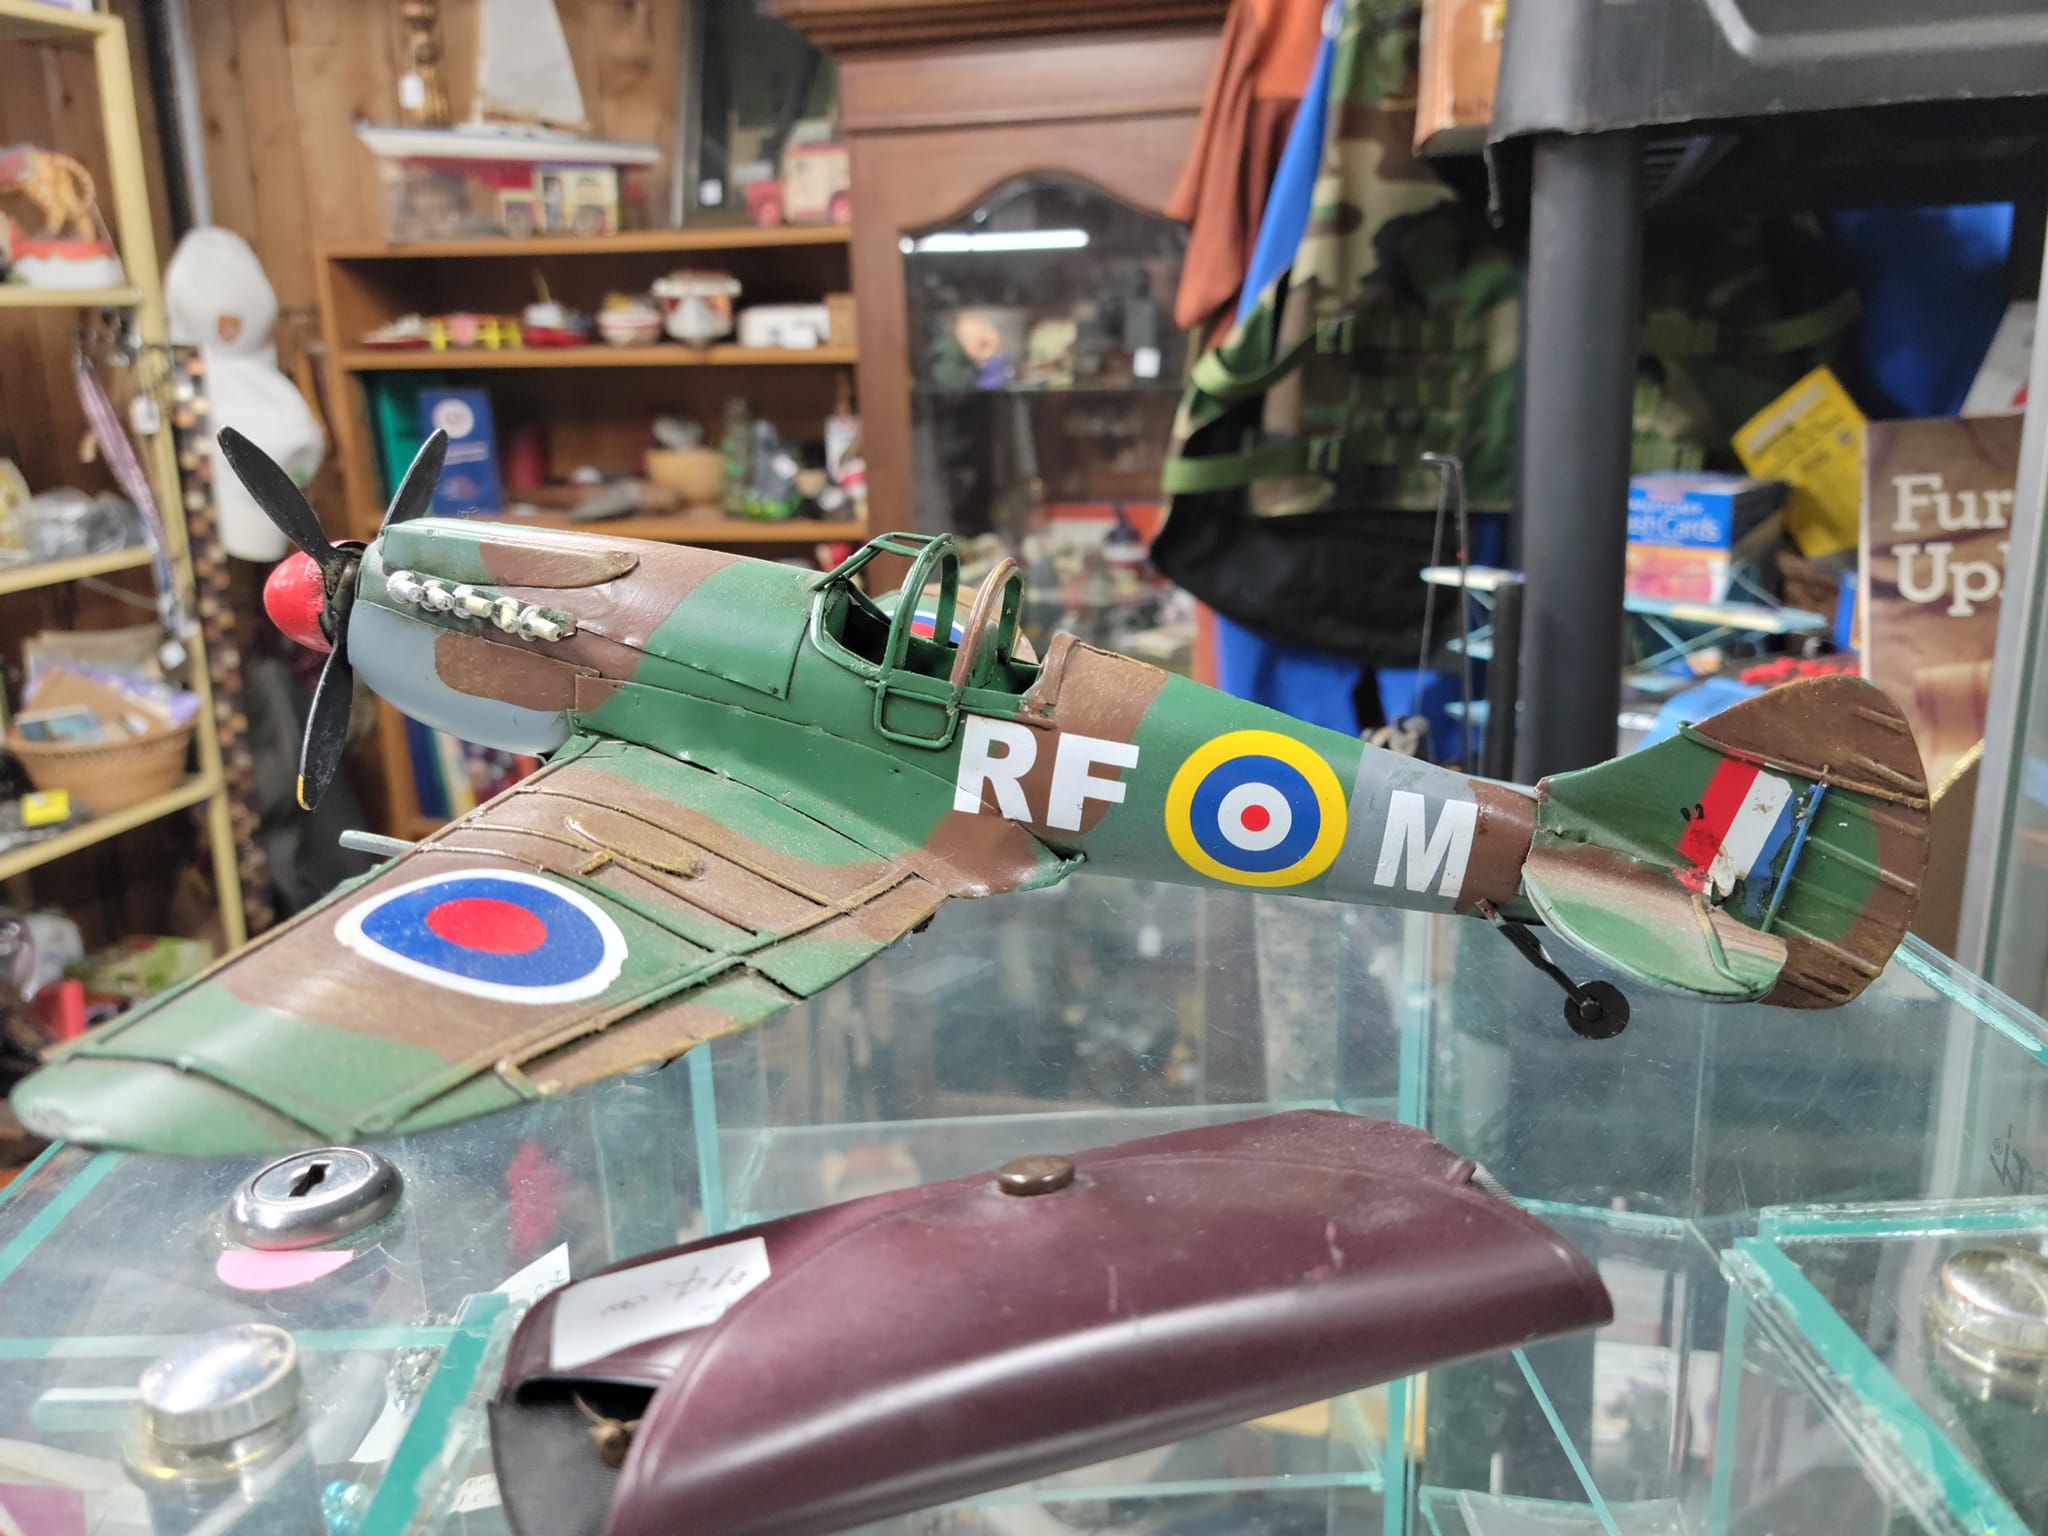 Airplane Model from Wynola Junction Antiques and Collectibles